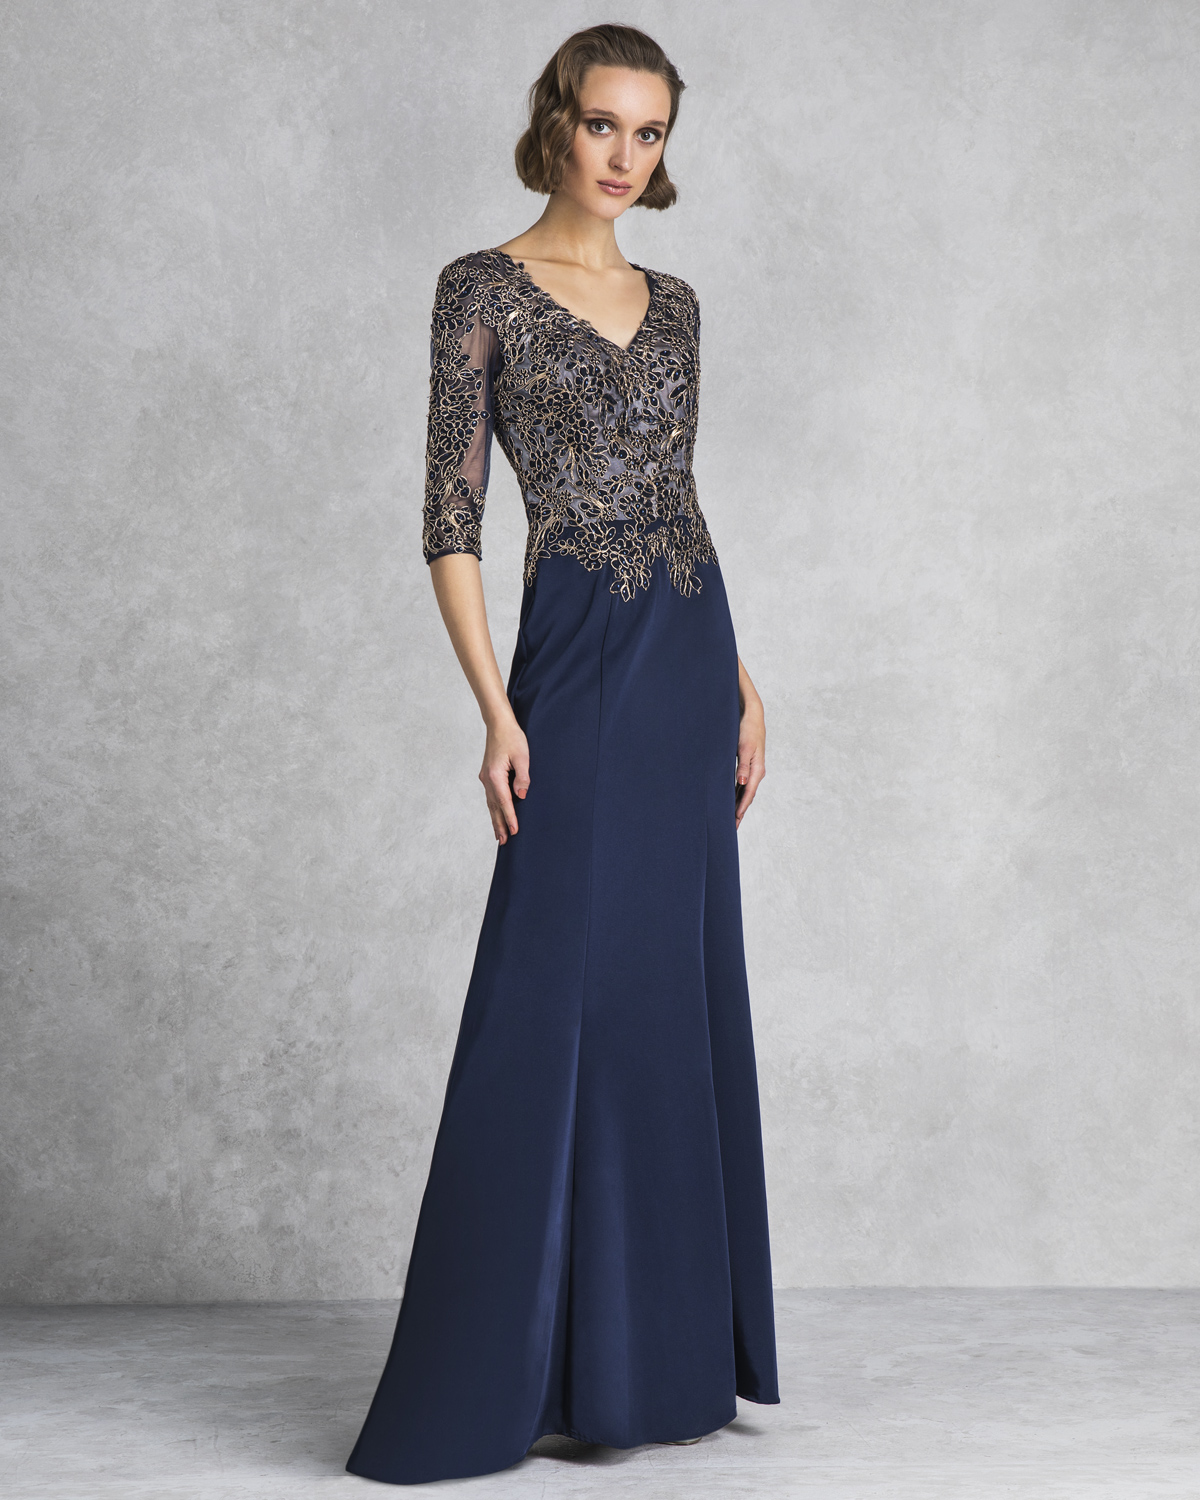 Classic Dresses / Long evening dress with long sleeves and beading